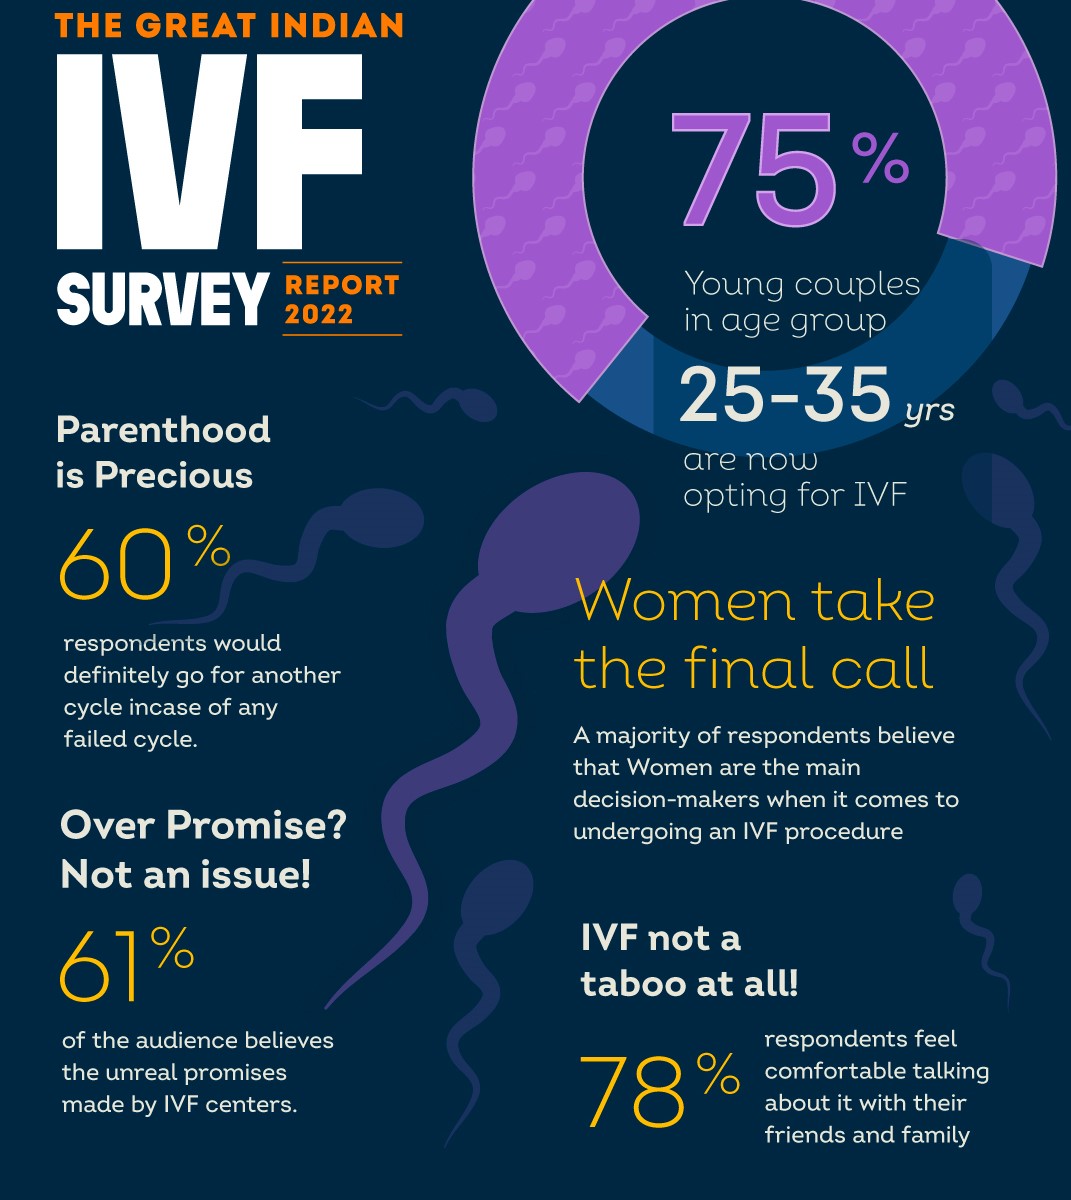 Young couples facing infertility are now opting for IVF treatments